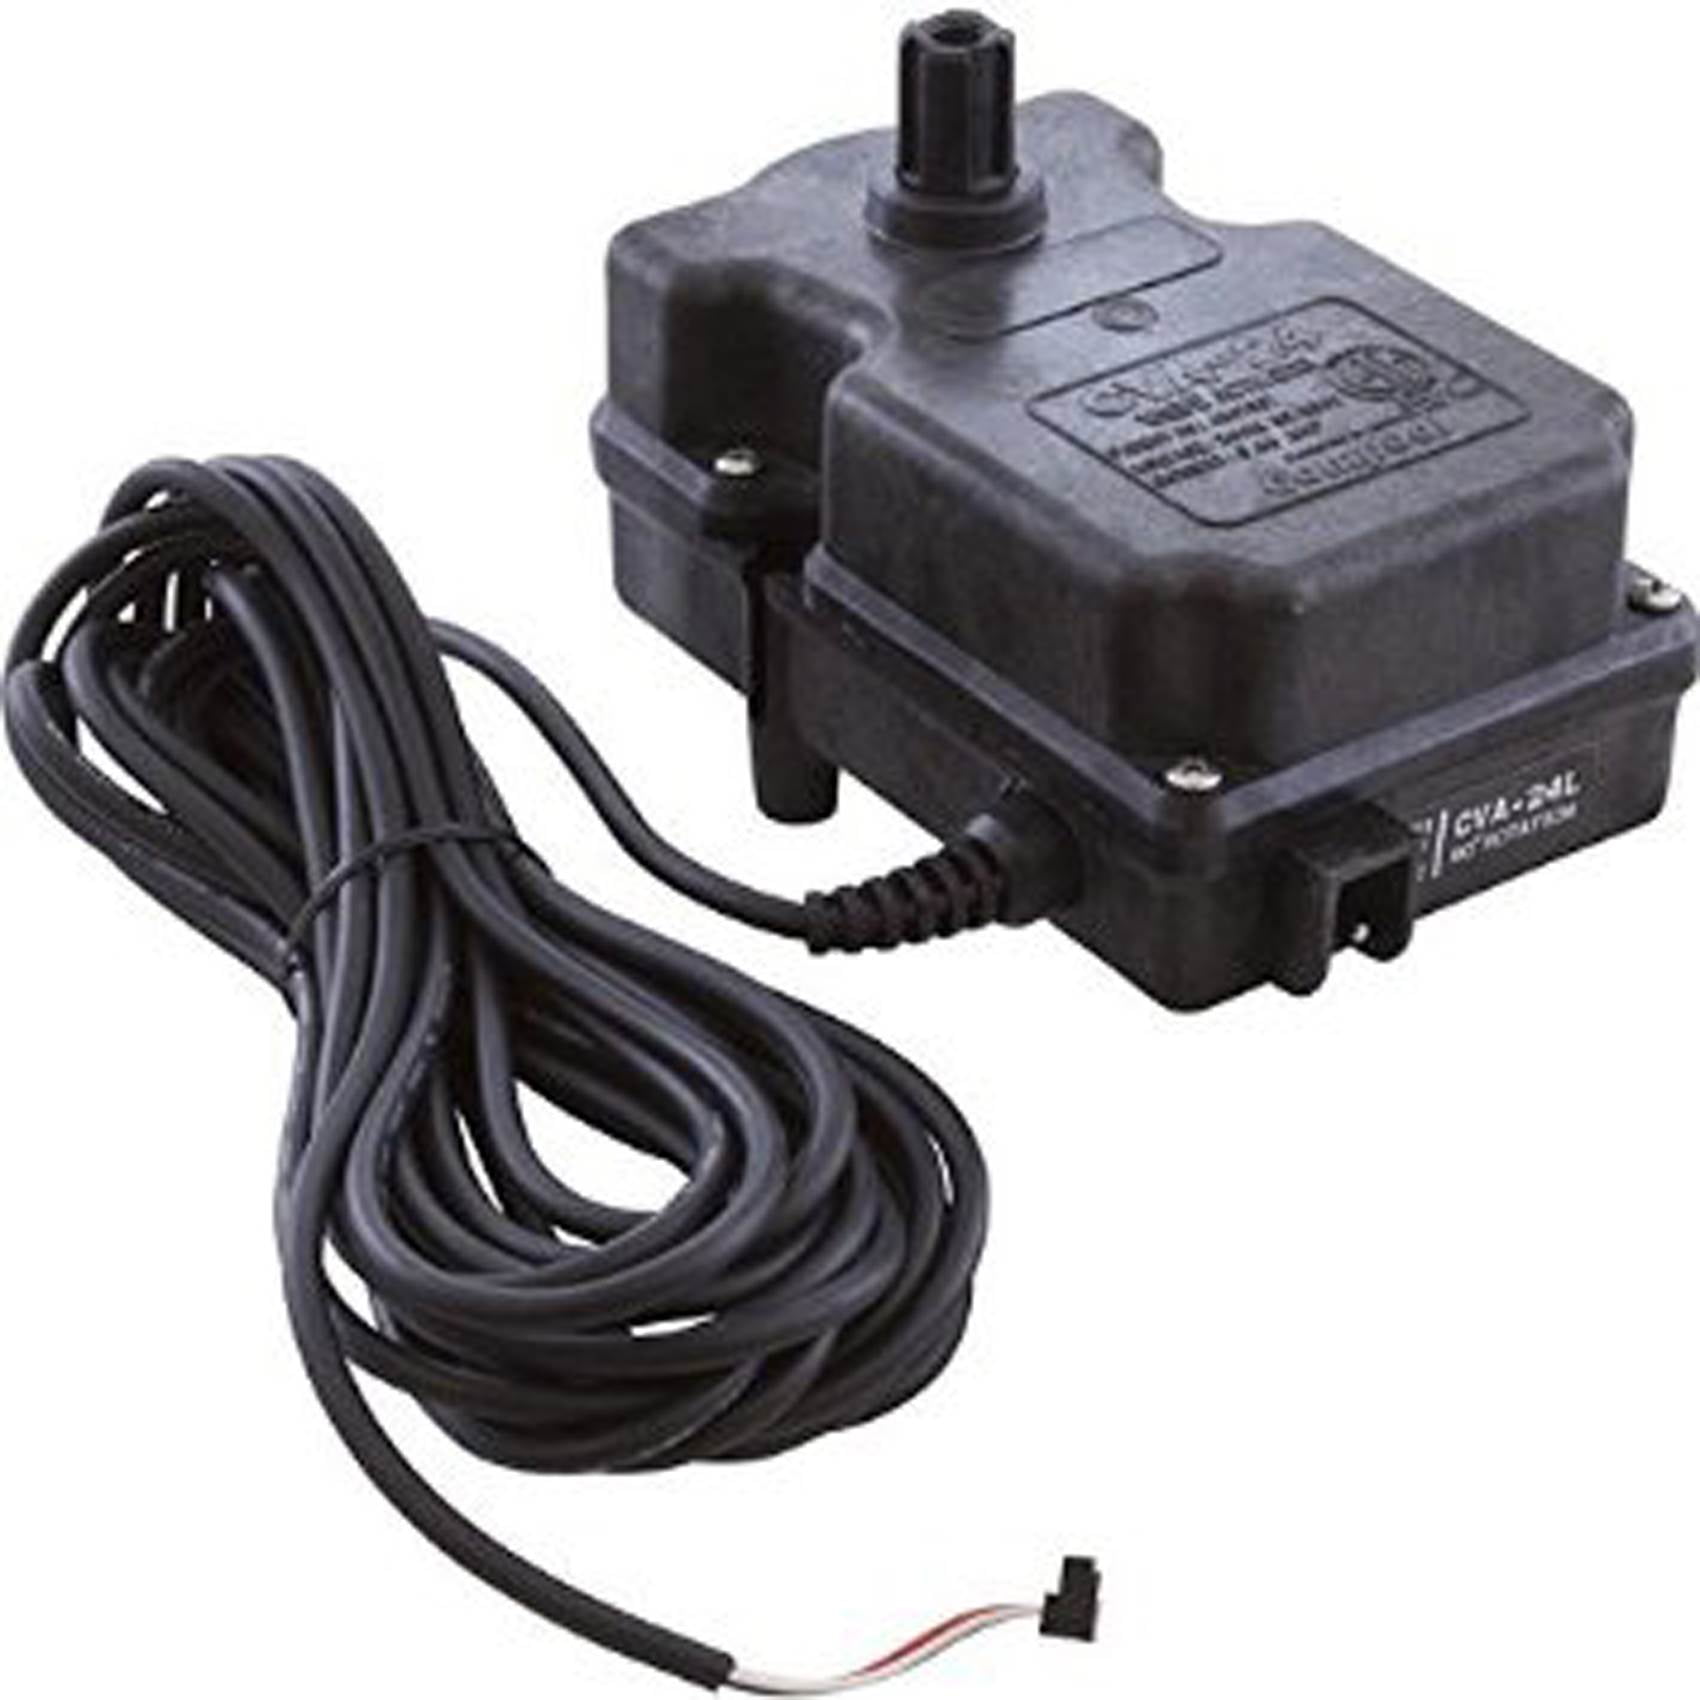 Pentair 263045 180 Degree 3-Port Pool And Spa Valve Actuator for sale online 